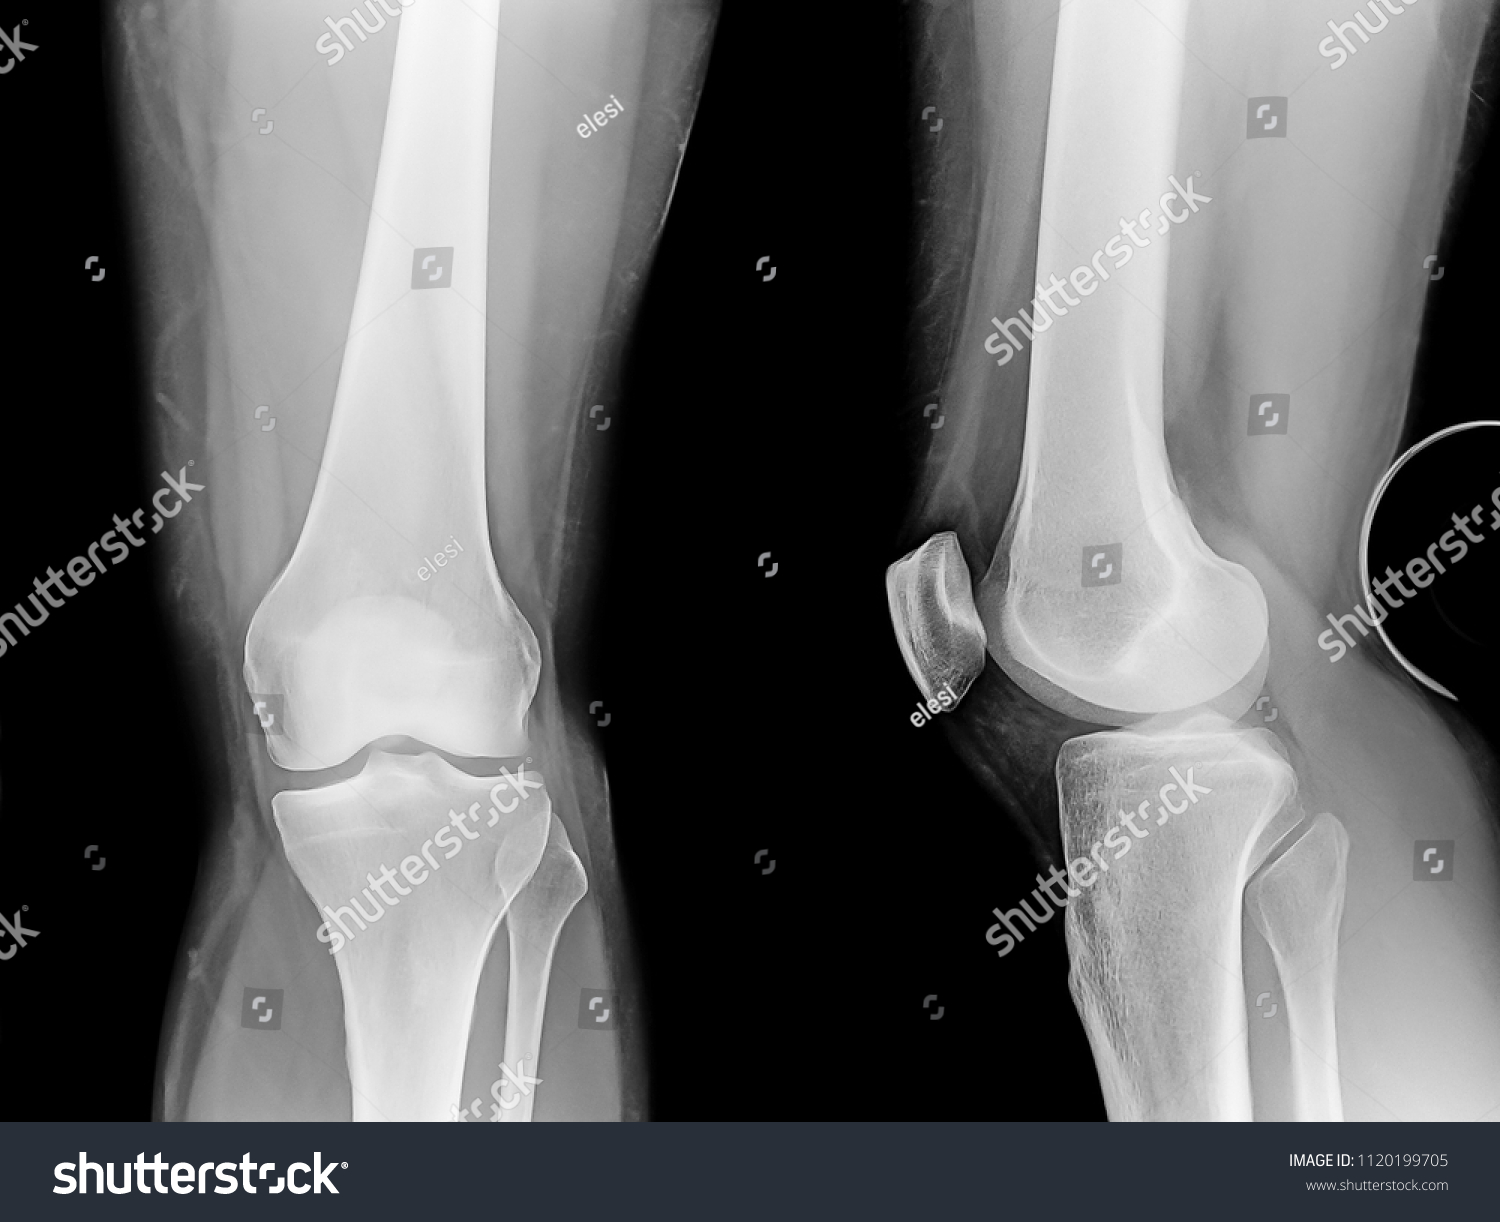 Xray Knee Lateral Posterior Views Stock Photo 1120199705 Shutterstock.